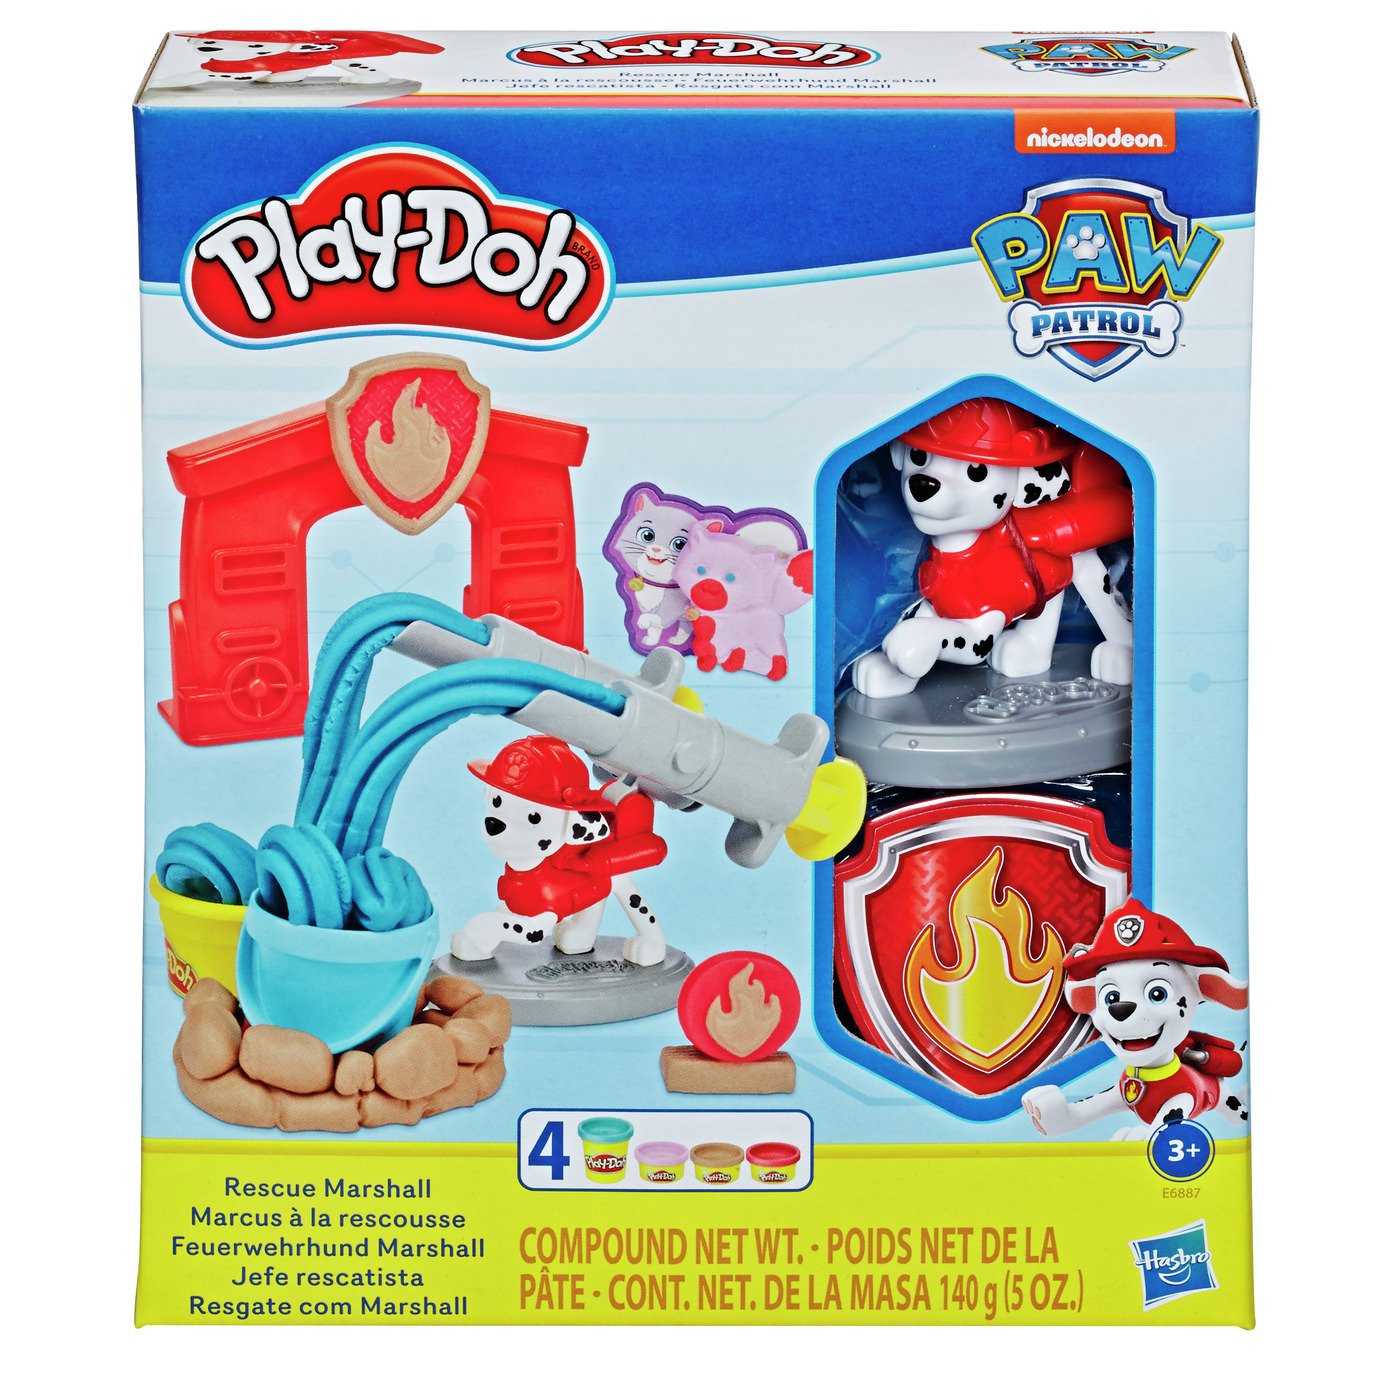 Play-Doh PAW Patrol Toolset Review